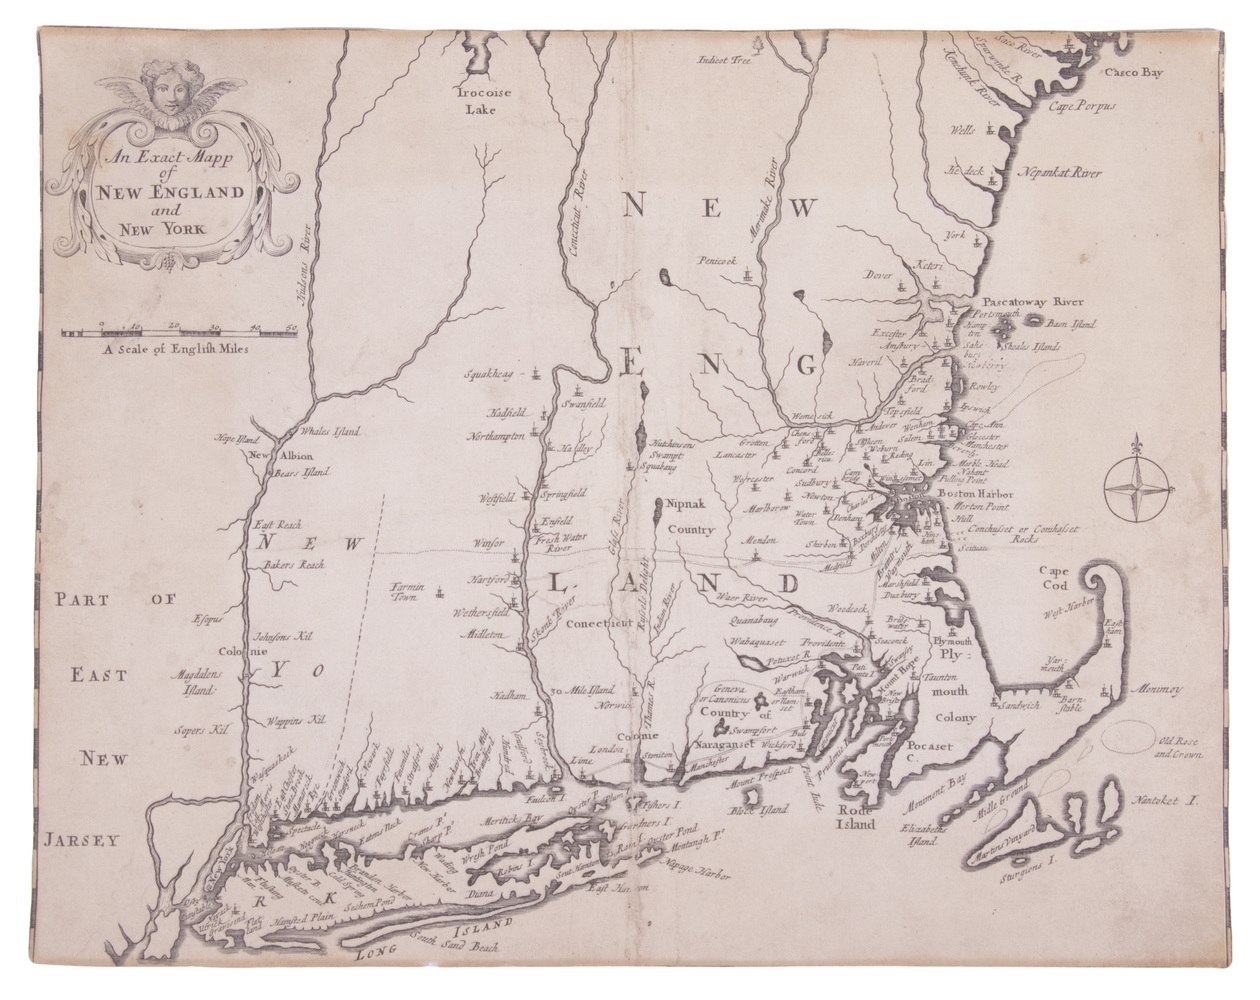 "AN EXACT MAPP OF NEW ENGLAND AND